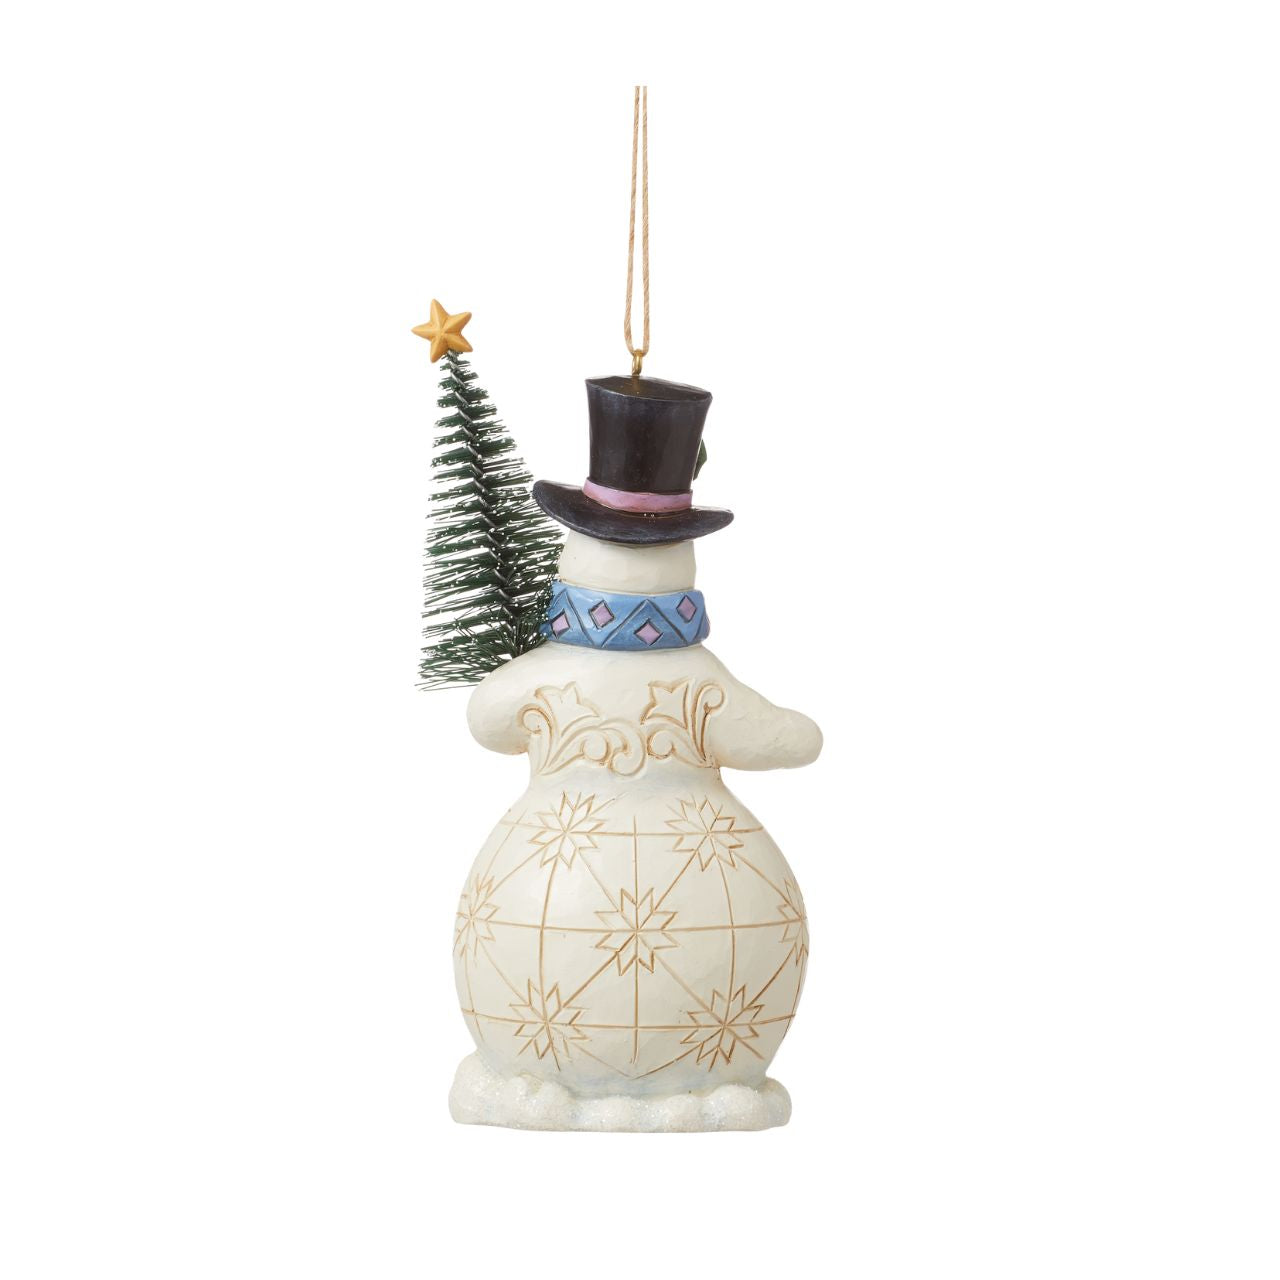 Snowman with Tree Christmas Hanging Ornament  Celebrate Christmas with this beautiful hand crafted and hand painted Snowman with Tree Hanging Ornament. Decorate your Christmas Tree with this intricate hanging ornament.